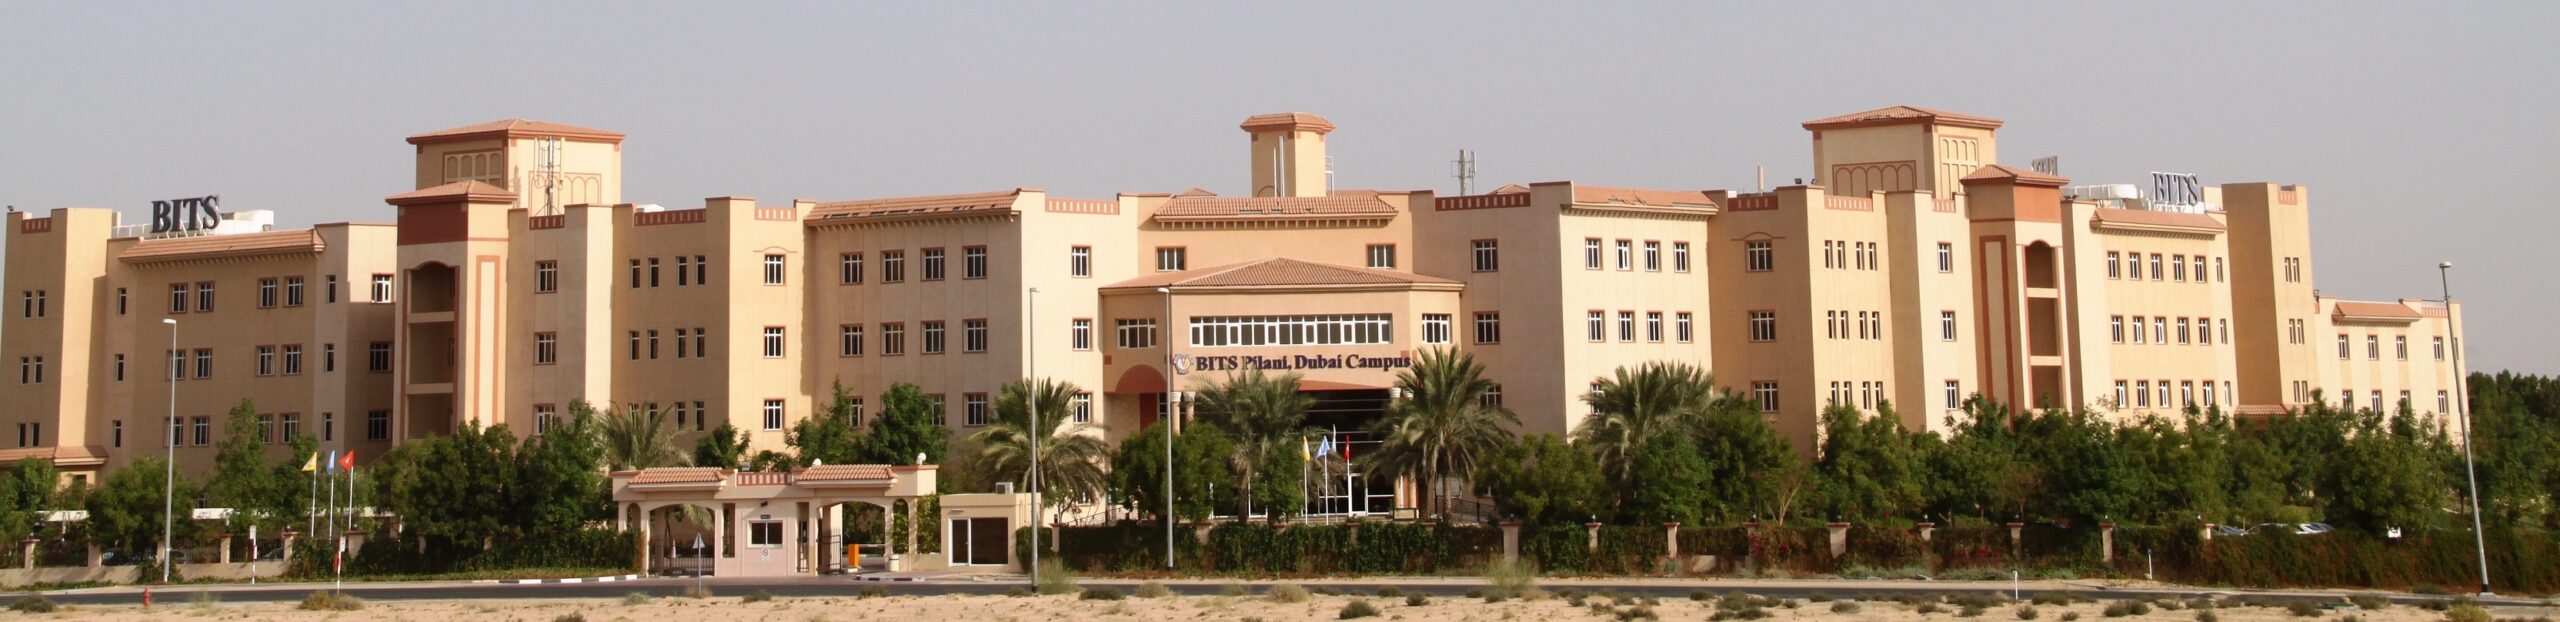 BITS Pilani Dubai Campus sees rise in students seeking admission from India